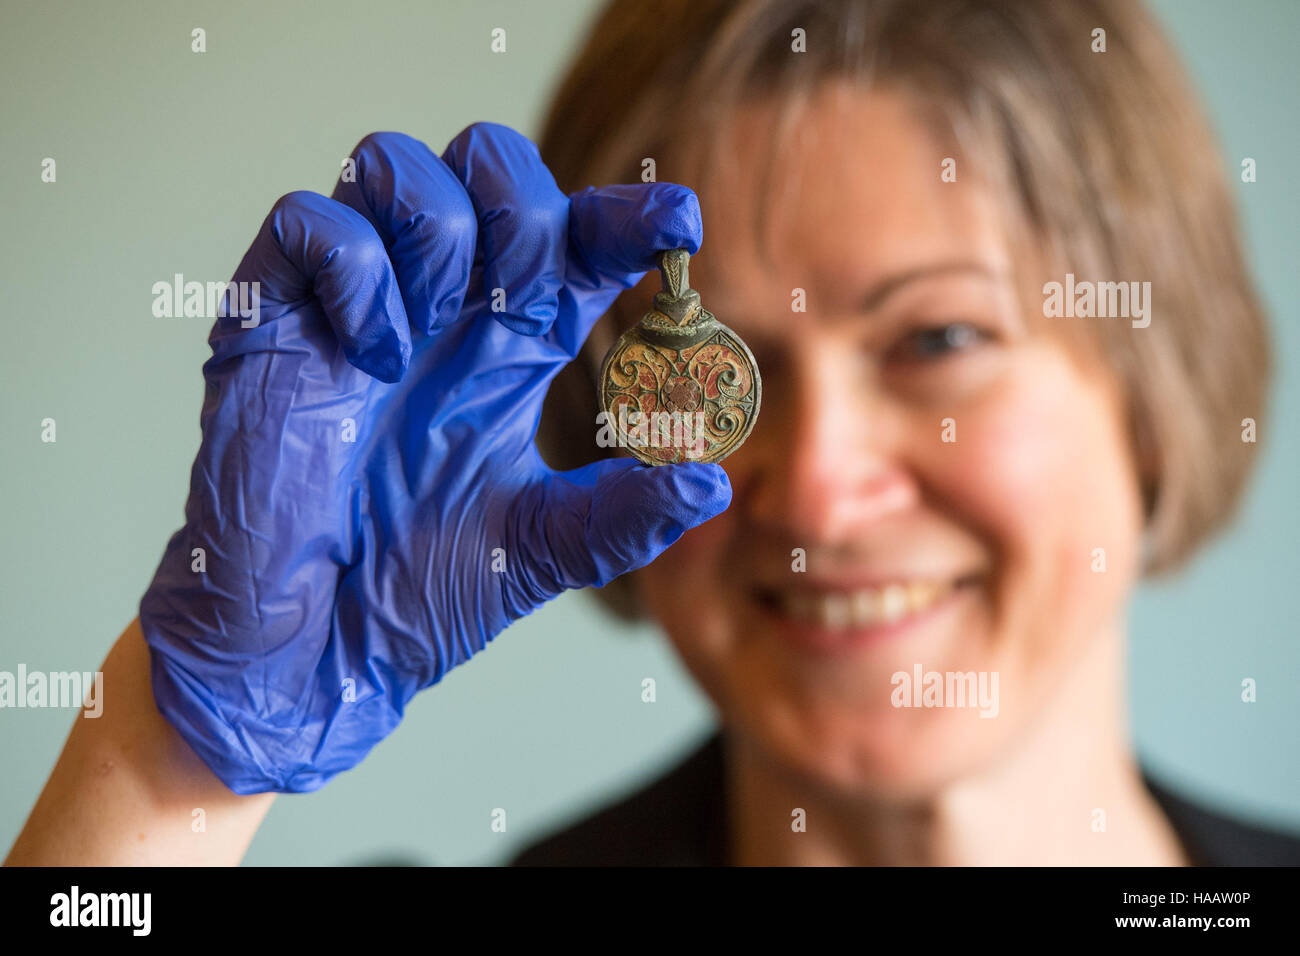 Helen Geake holds an Anglo-Saxon hanging bowl mount from AD 600-725, found in West Sussex, seen during a photocall at the British museum in London for some of the important finds made by the public in 2015 and recorded under the British Museum's Portable Antiquities Scheme (PAS) and Treasure annual reports. Stock Photo